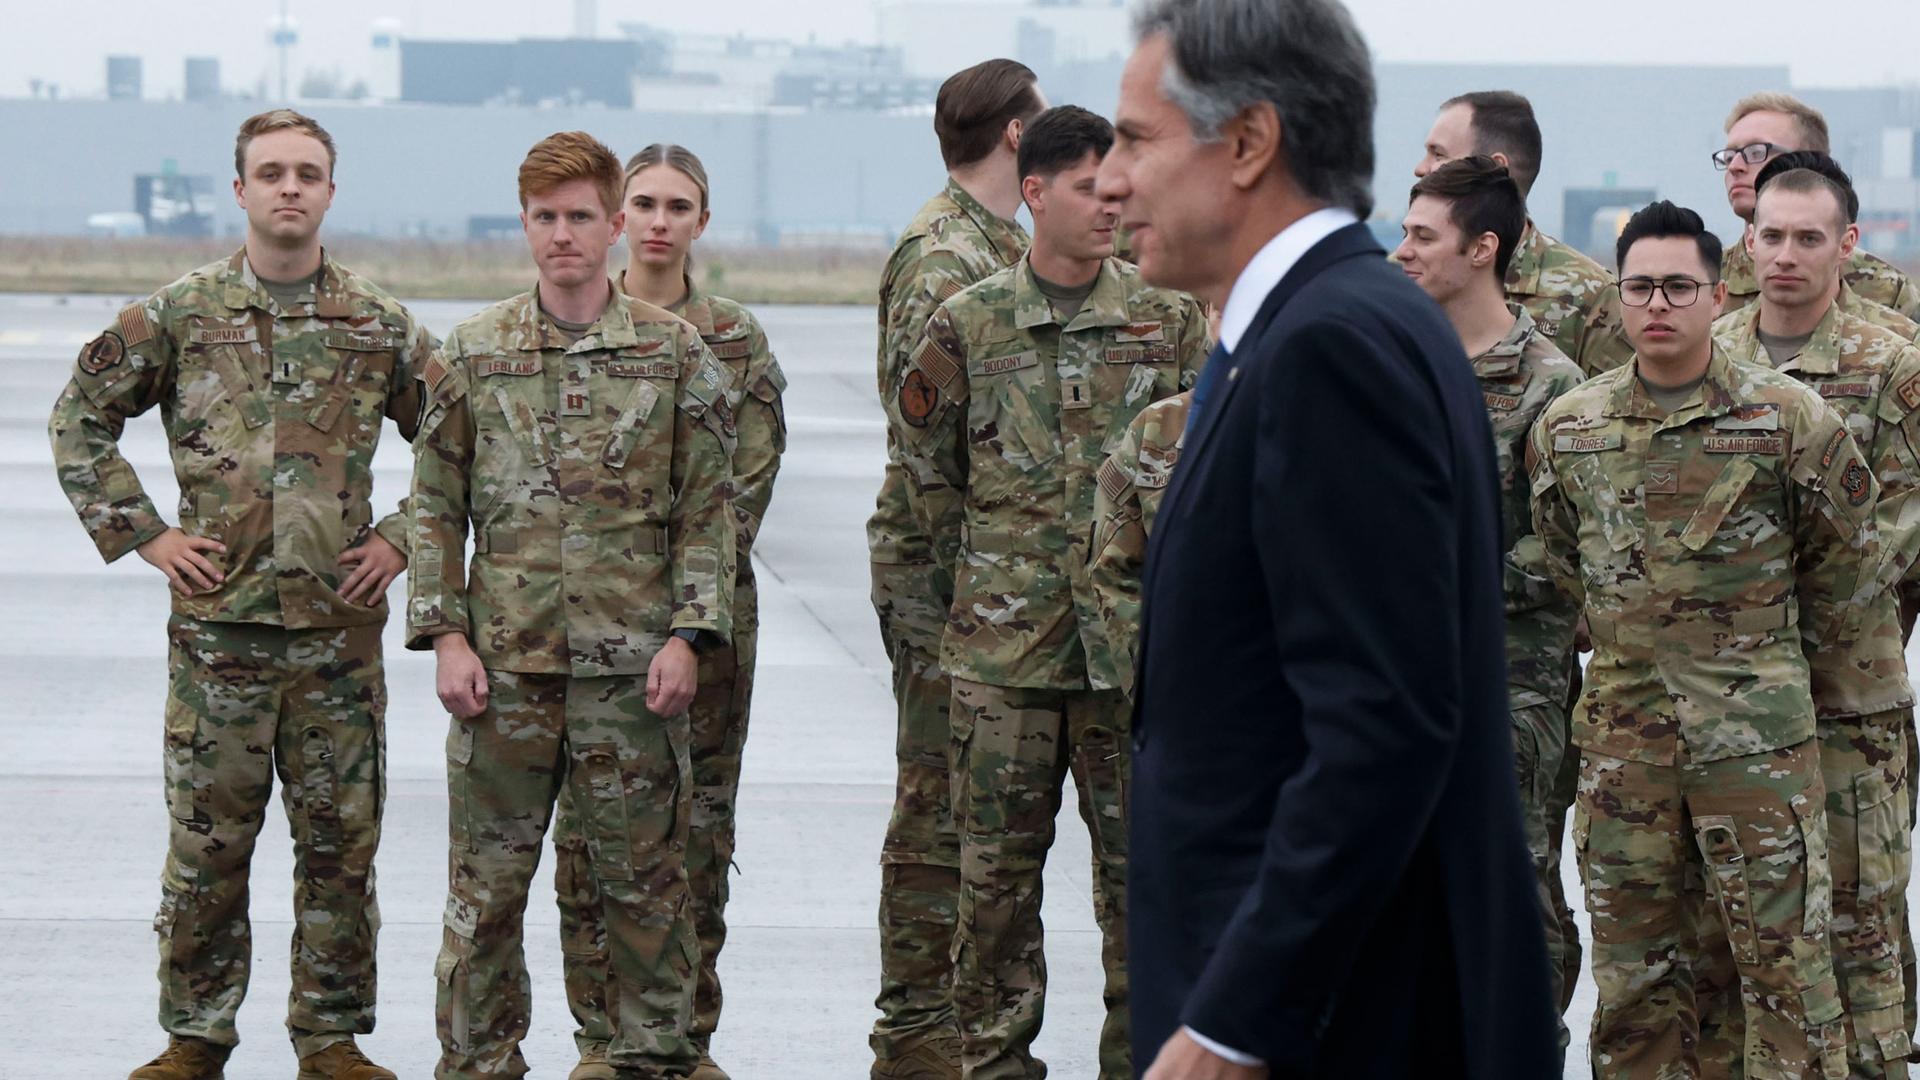 American military personnel wait to greet US Secretary of State Antony Blinken before he boards a plane to travel to Brussels.